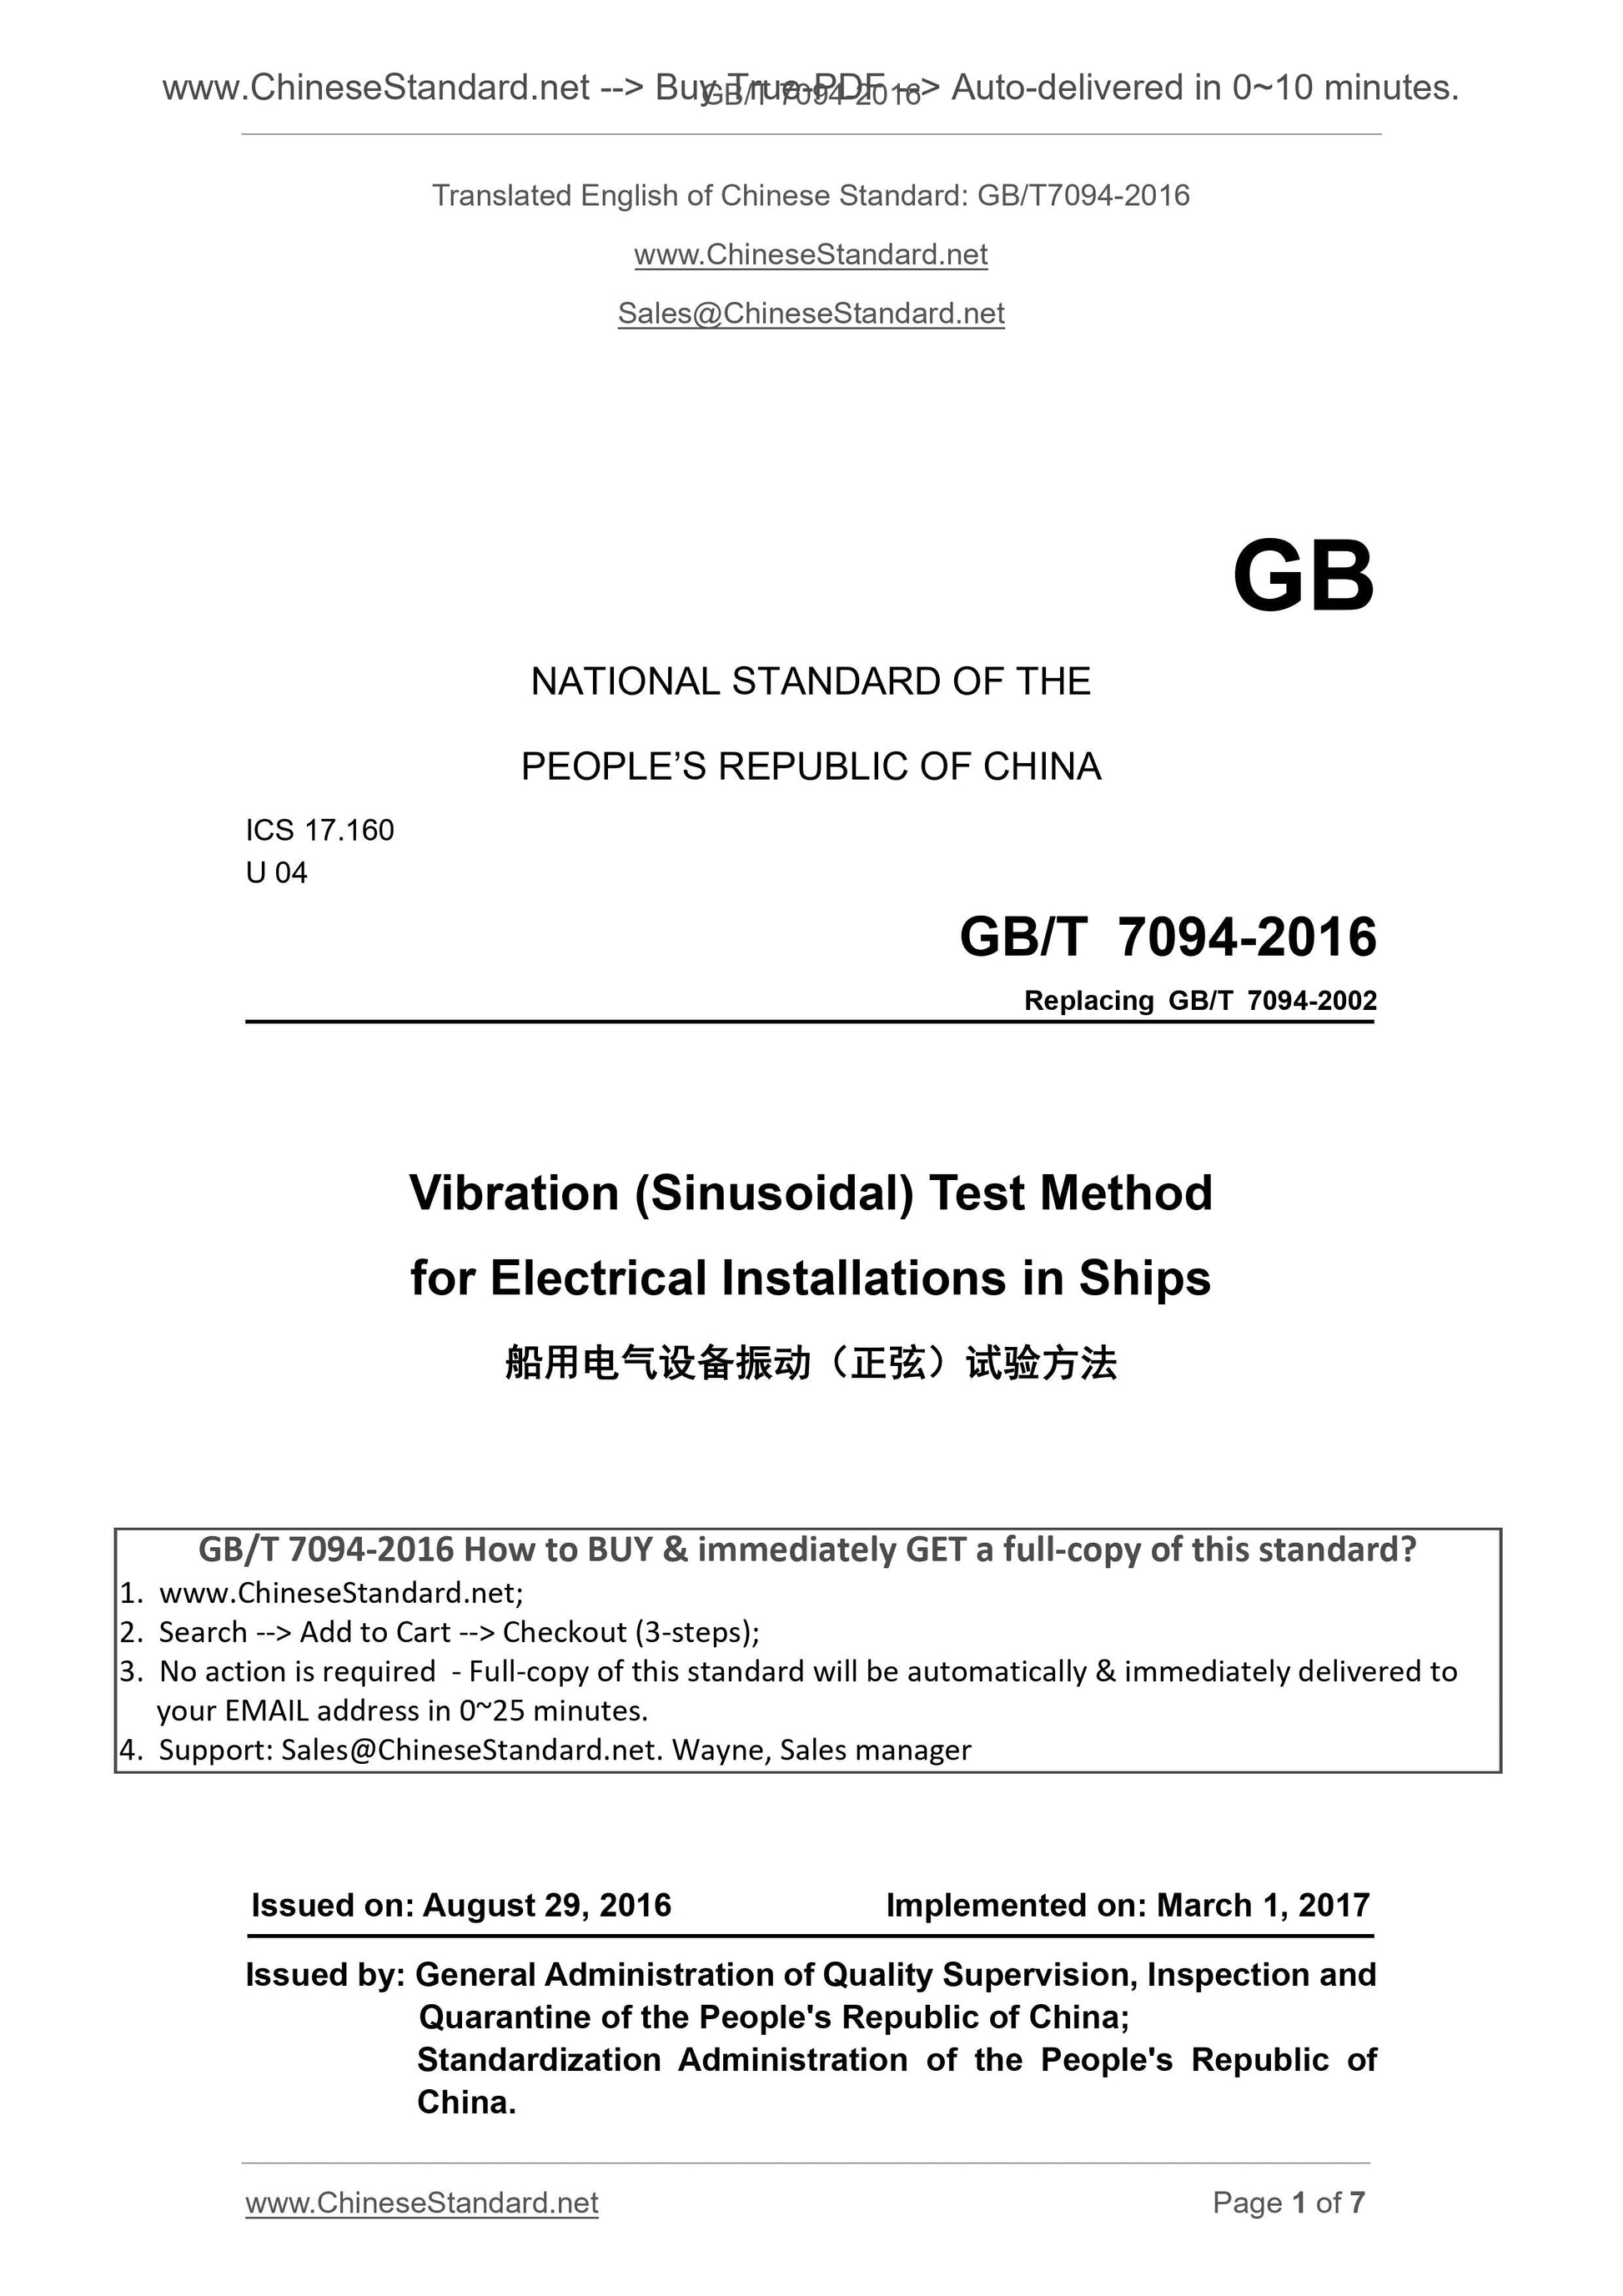 GB/T 7094-2016 Page 1